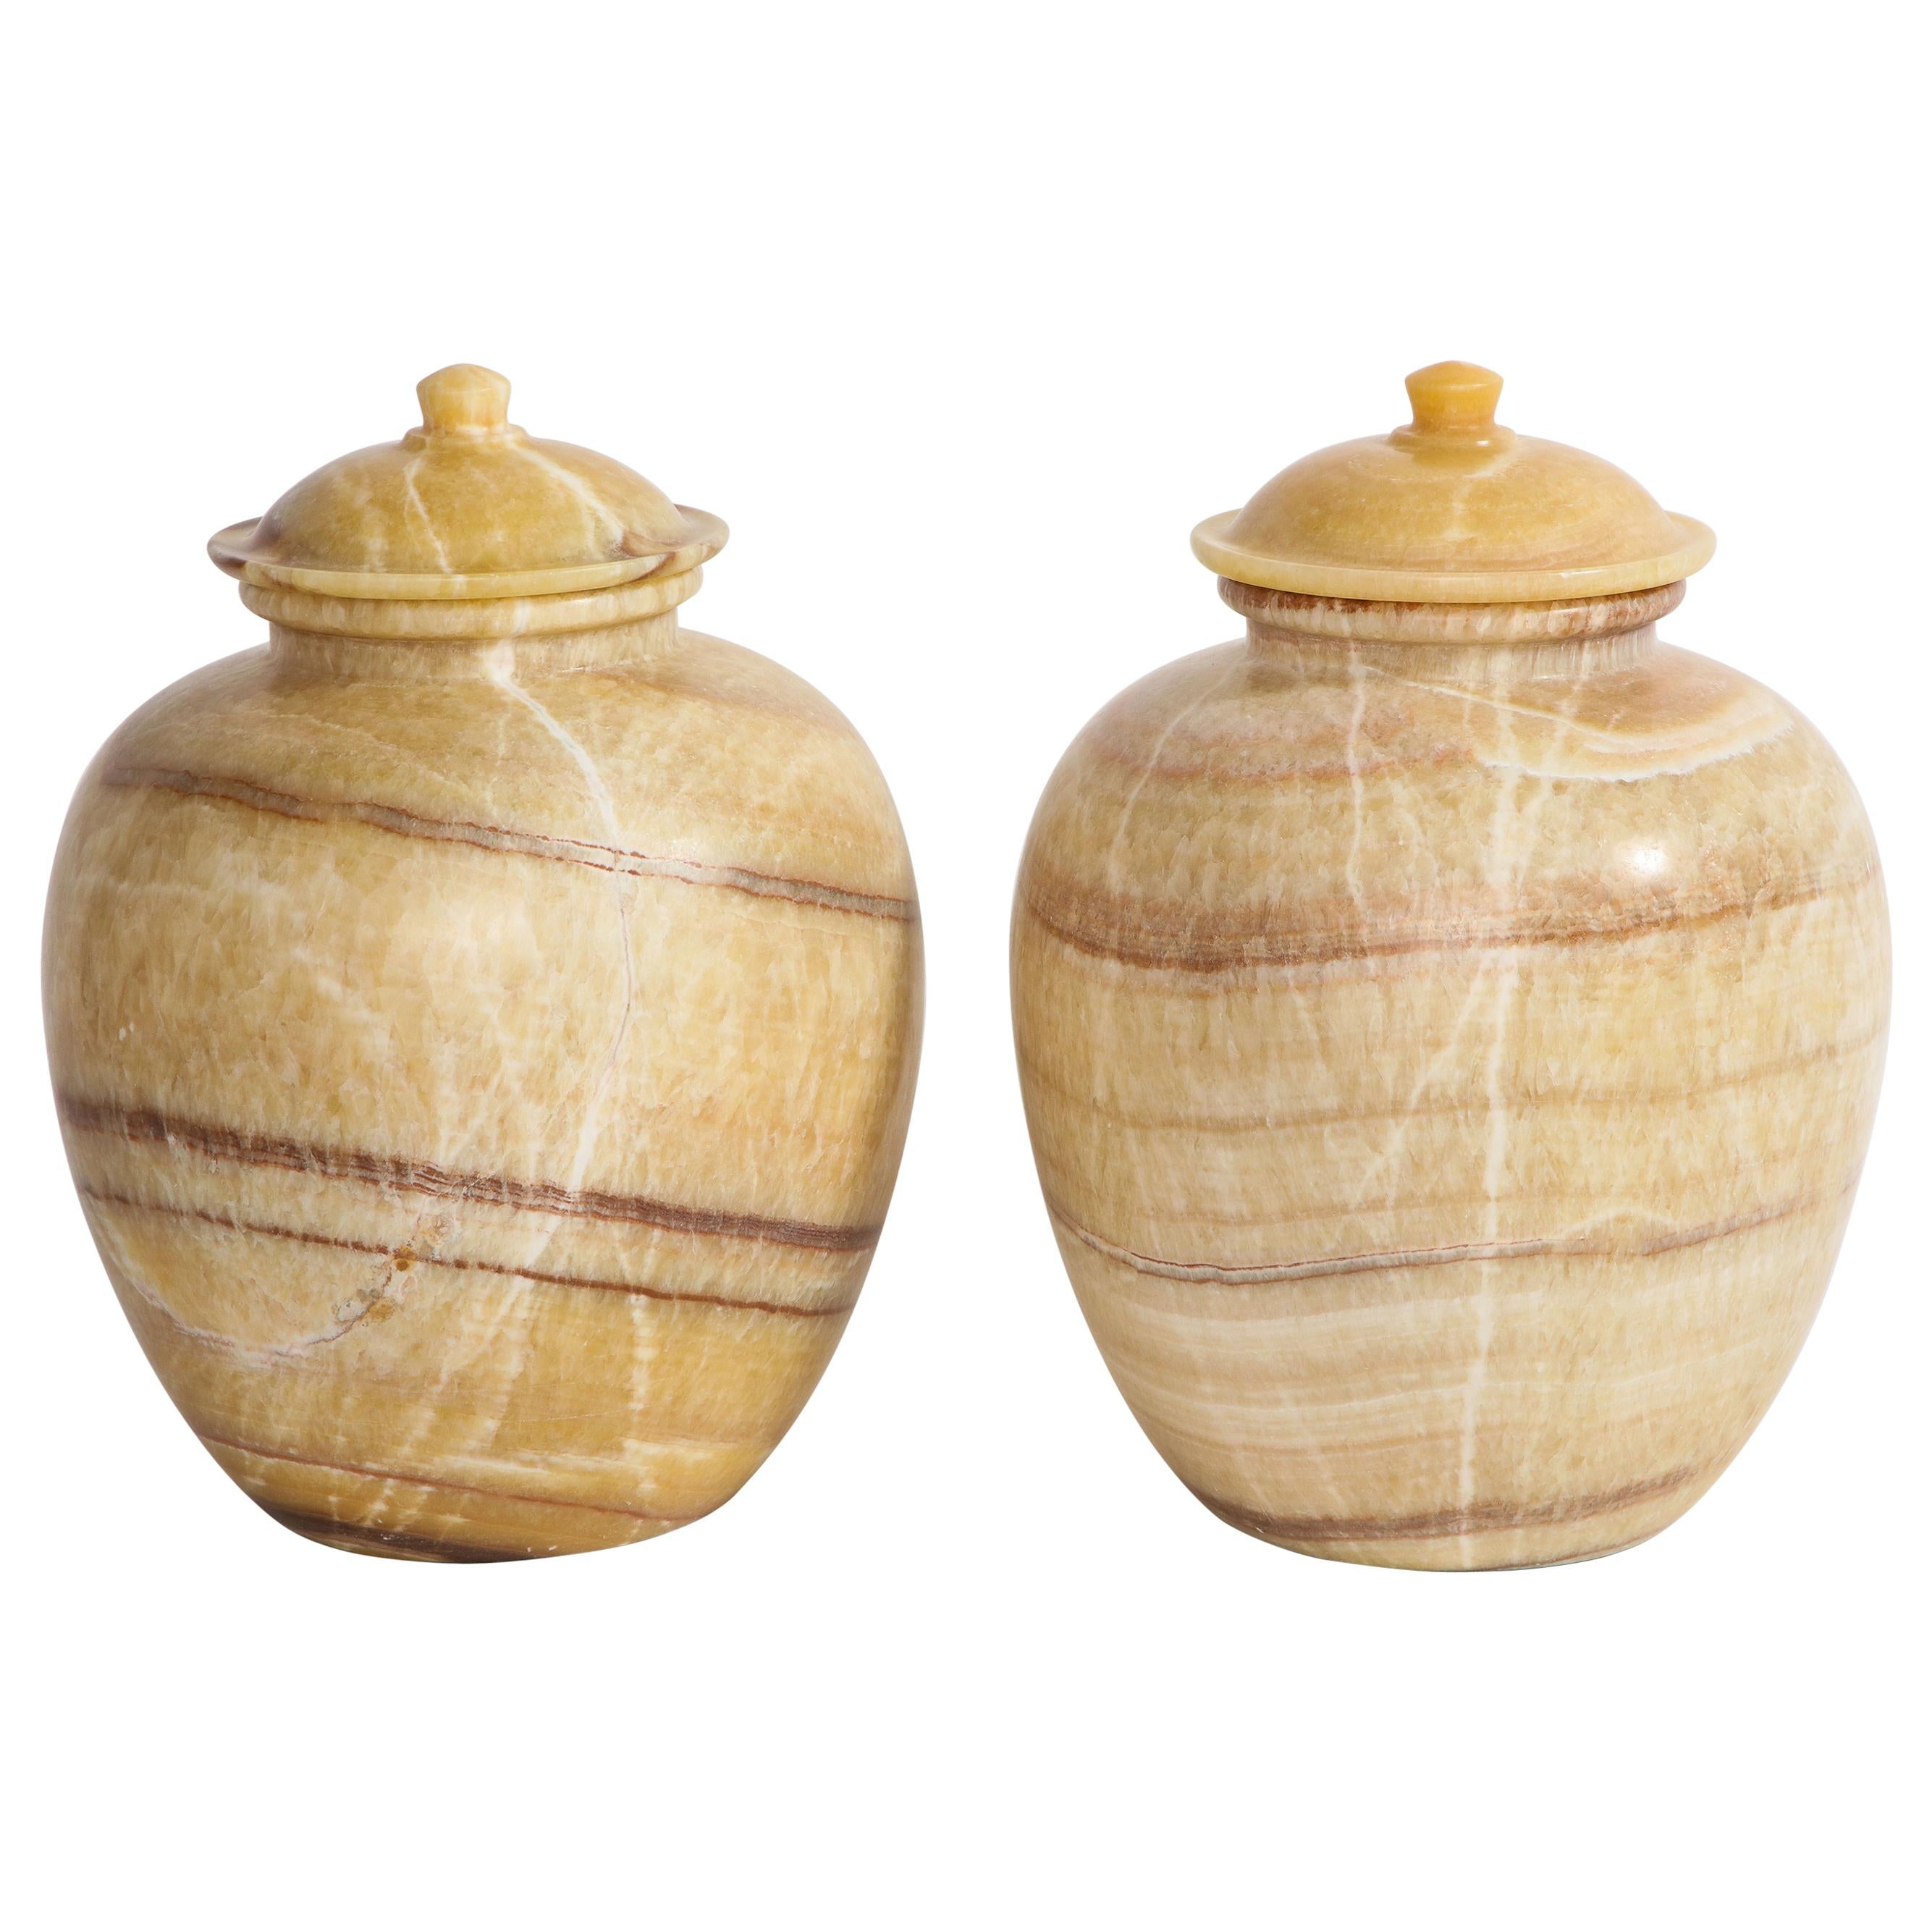 Pair of Egyptian Midcentury/Art Deco Style Honey Alabaster Marble Covered Vases For Sale